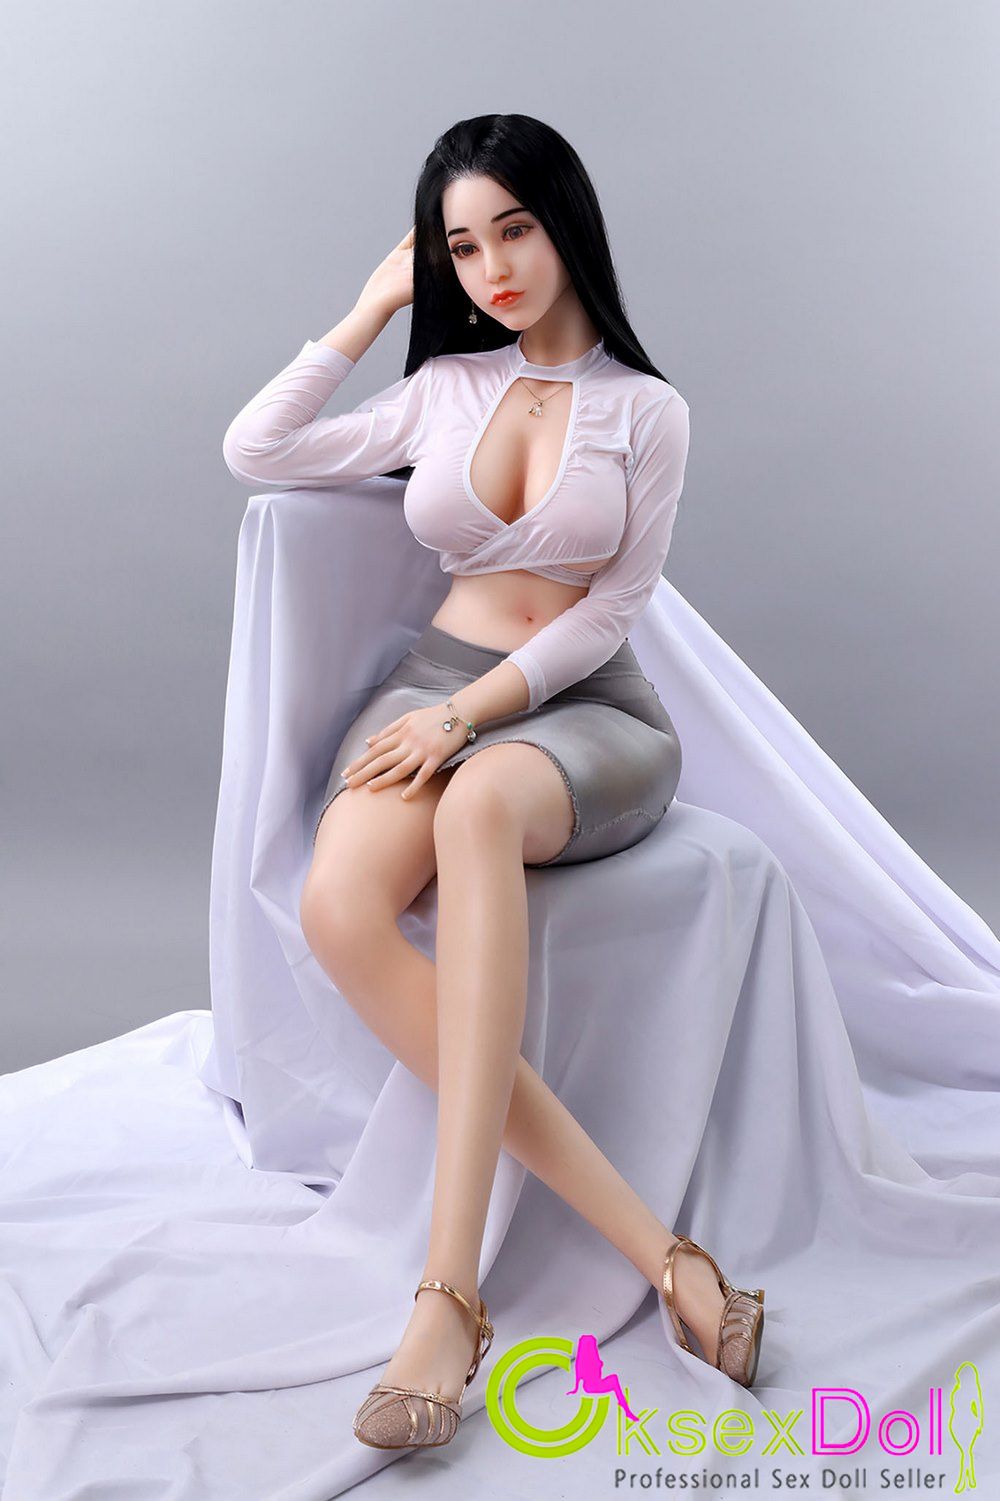 40kg Real Dolls pic